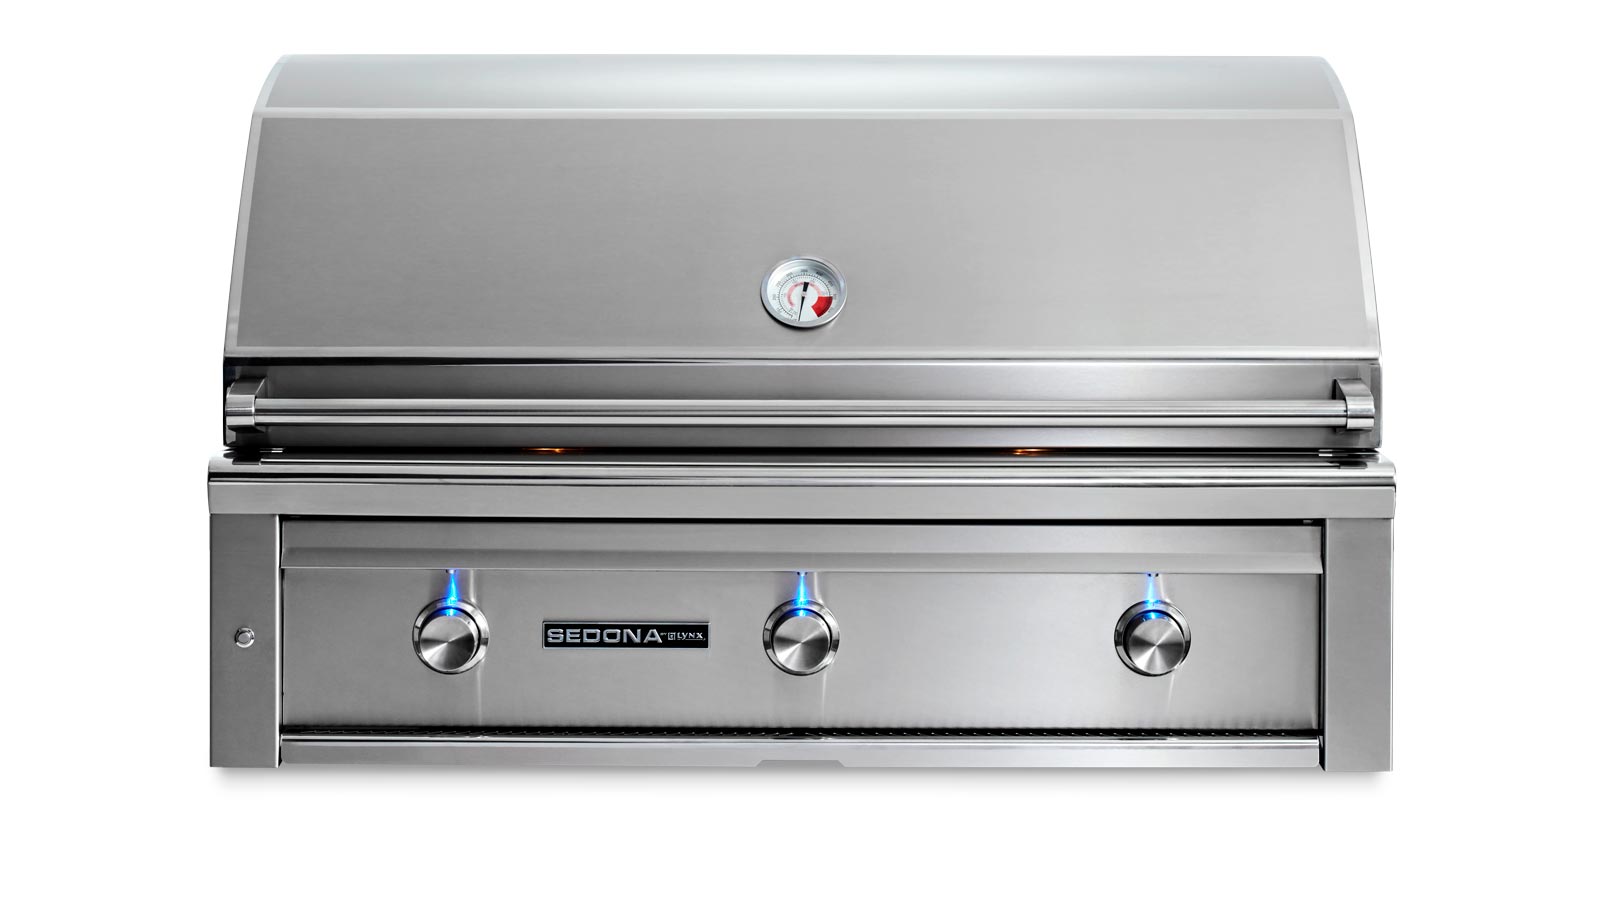 42" Built-in Grill with 1 Prosear Burner and 2 Stainless Steel Burners (L700PS)